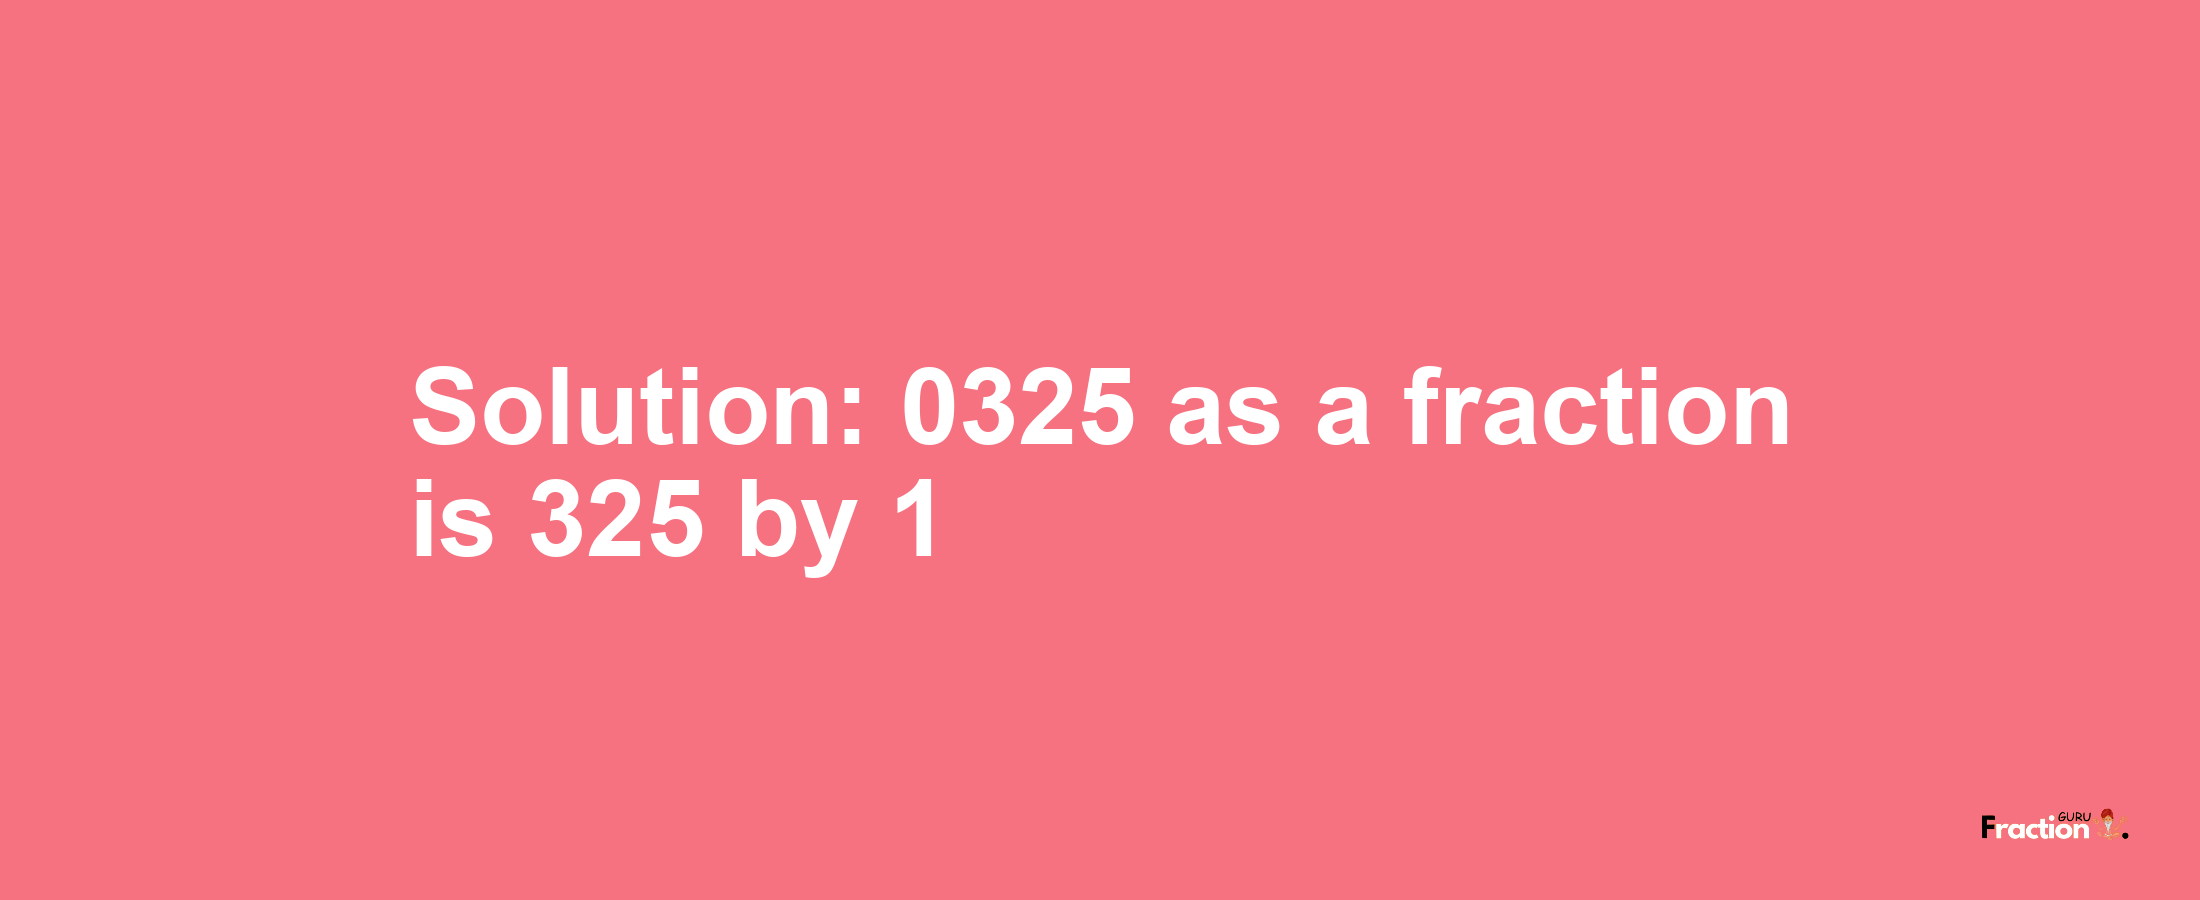 Solution:0325 as a fraction is 325/1